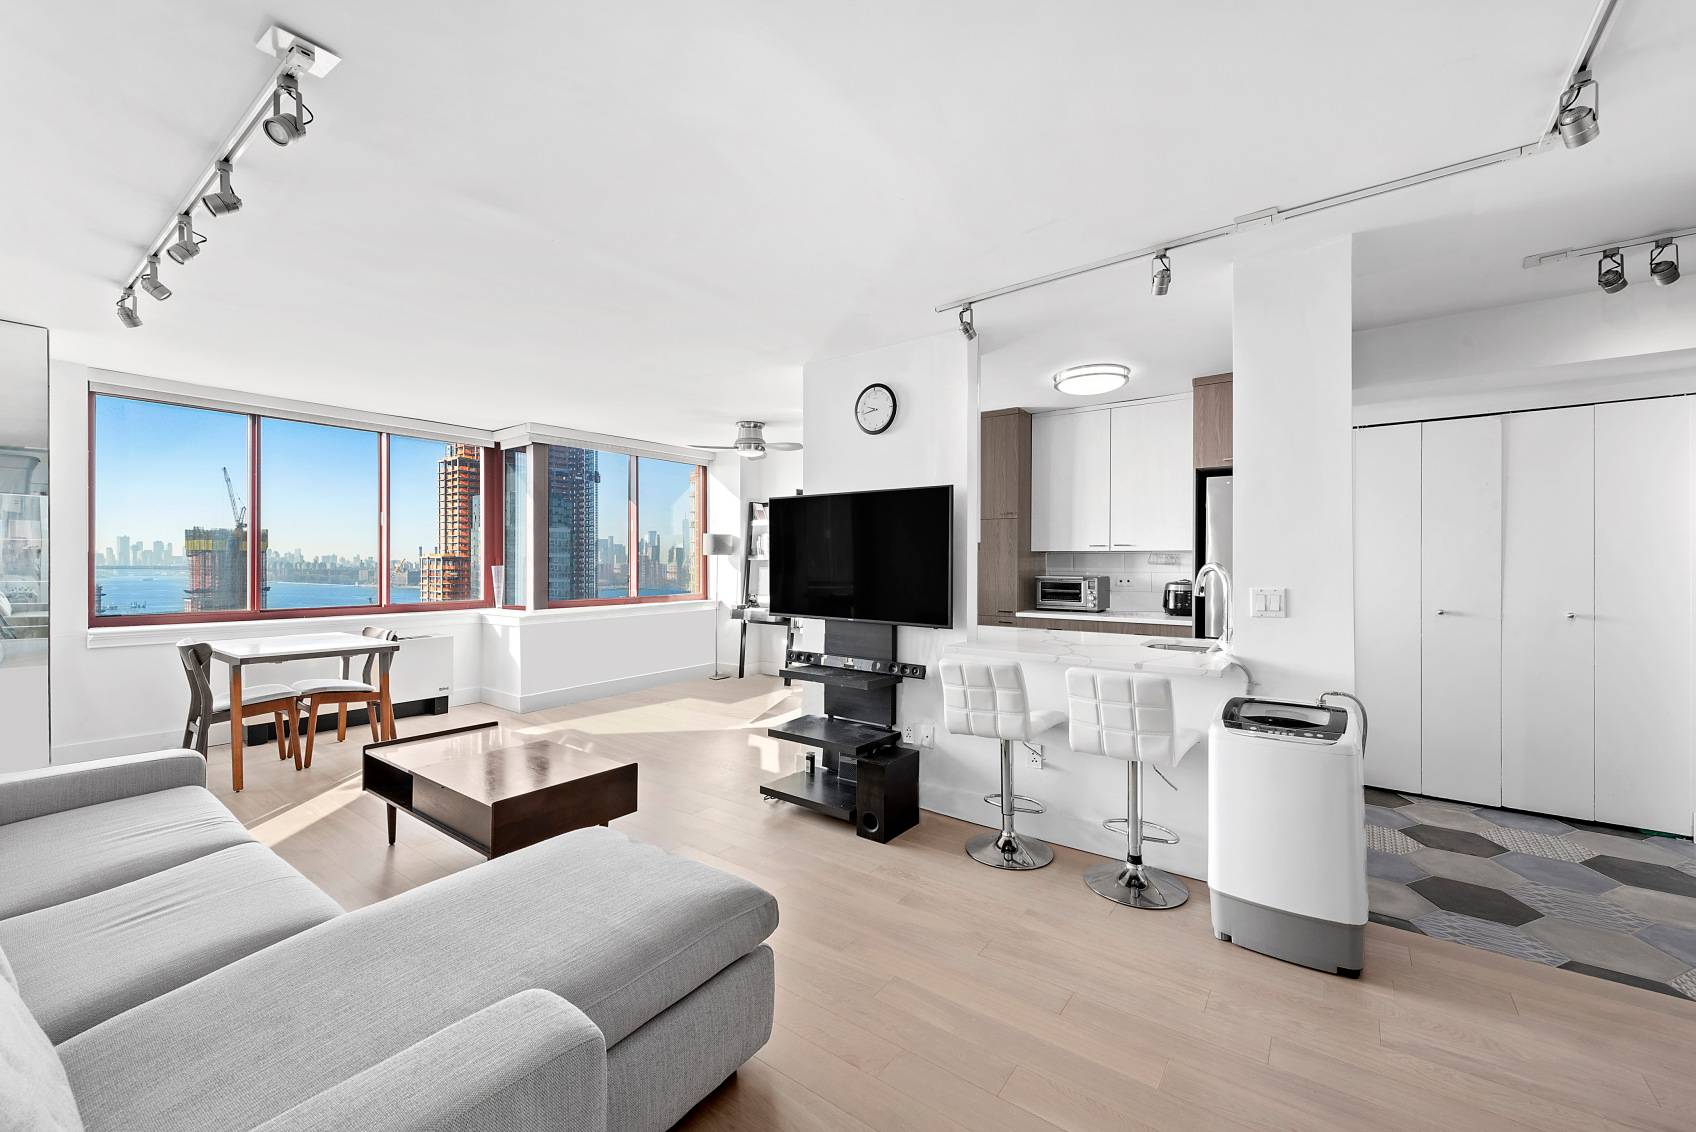 Perched on the 26th Floor featuring panoramic views of Manhattan, Brooklyn and Queens is this spacious newly renovated 1 bedroom residence in Long Island City.